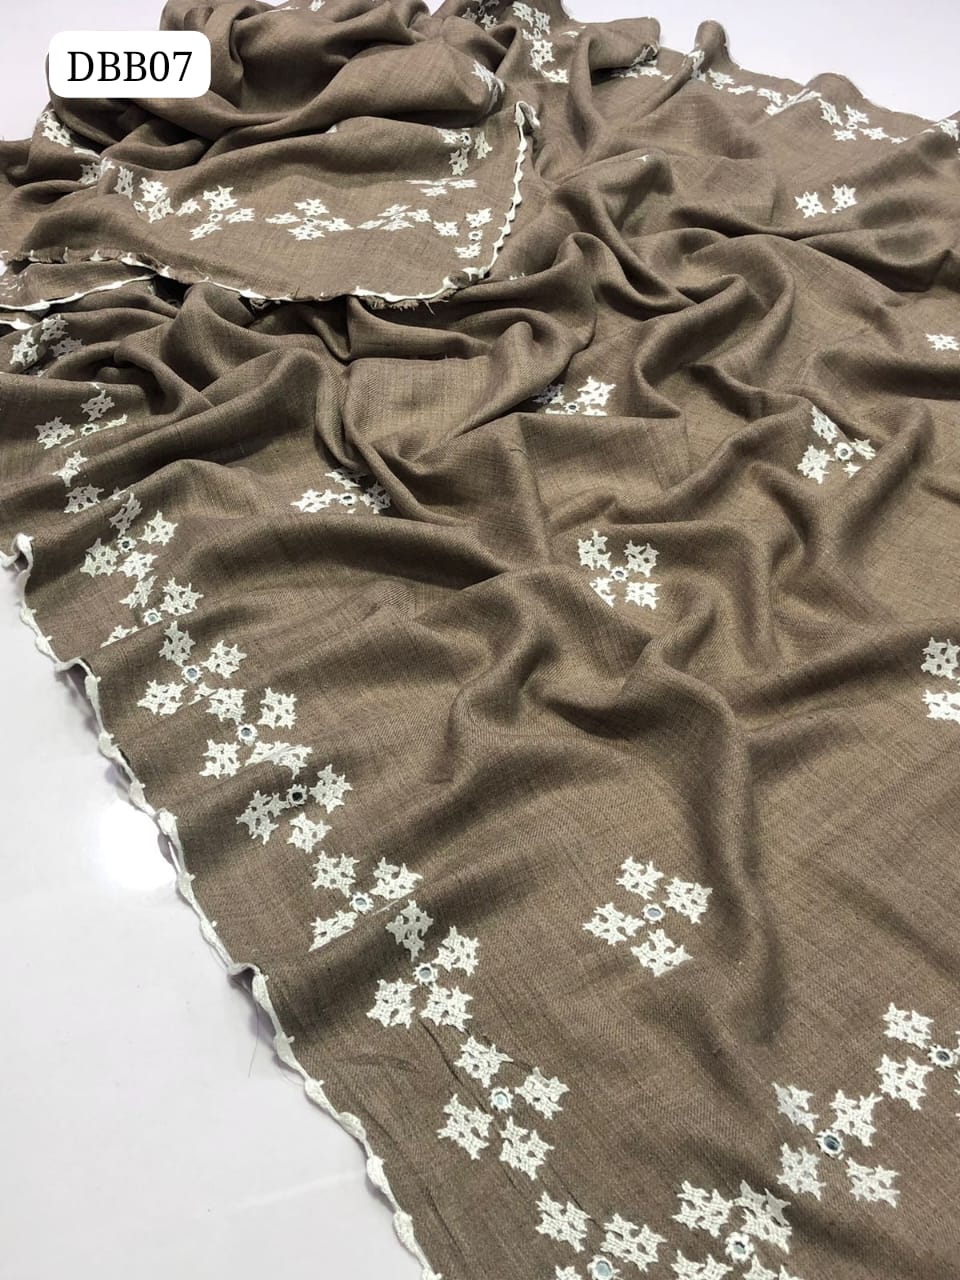 ﻿Pashmina Shawl Elegant And Beautiful Hand Made Sindhi Embroidery On Borders Four Sided Hand Made Lace Shawl